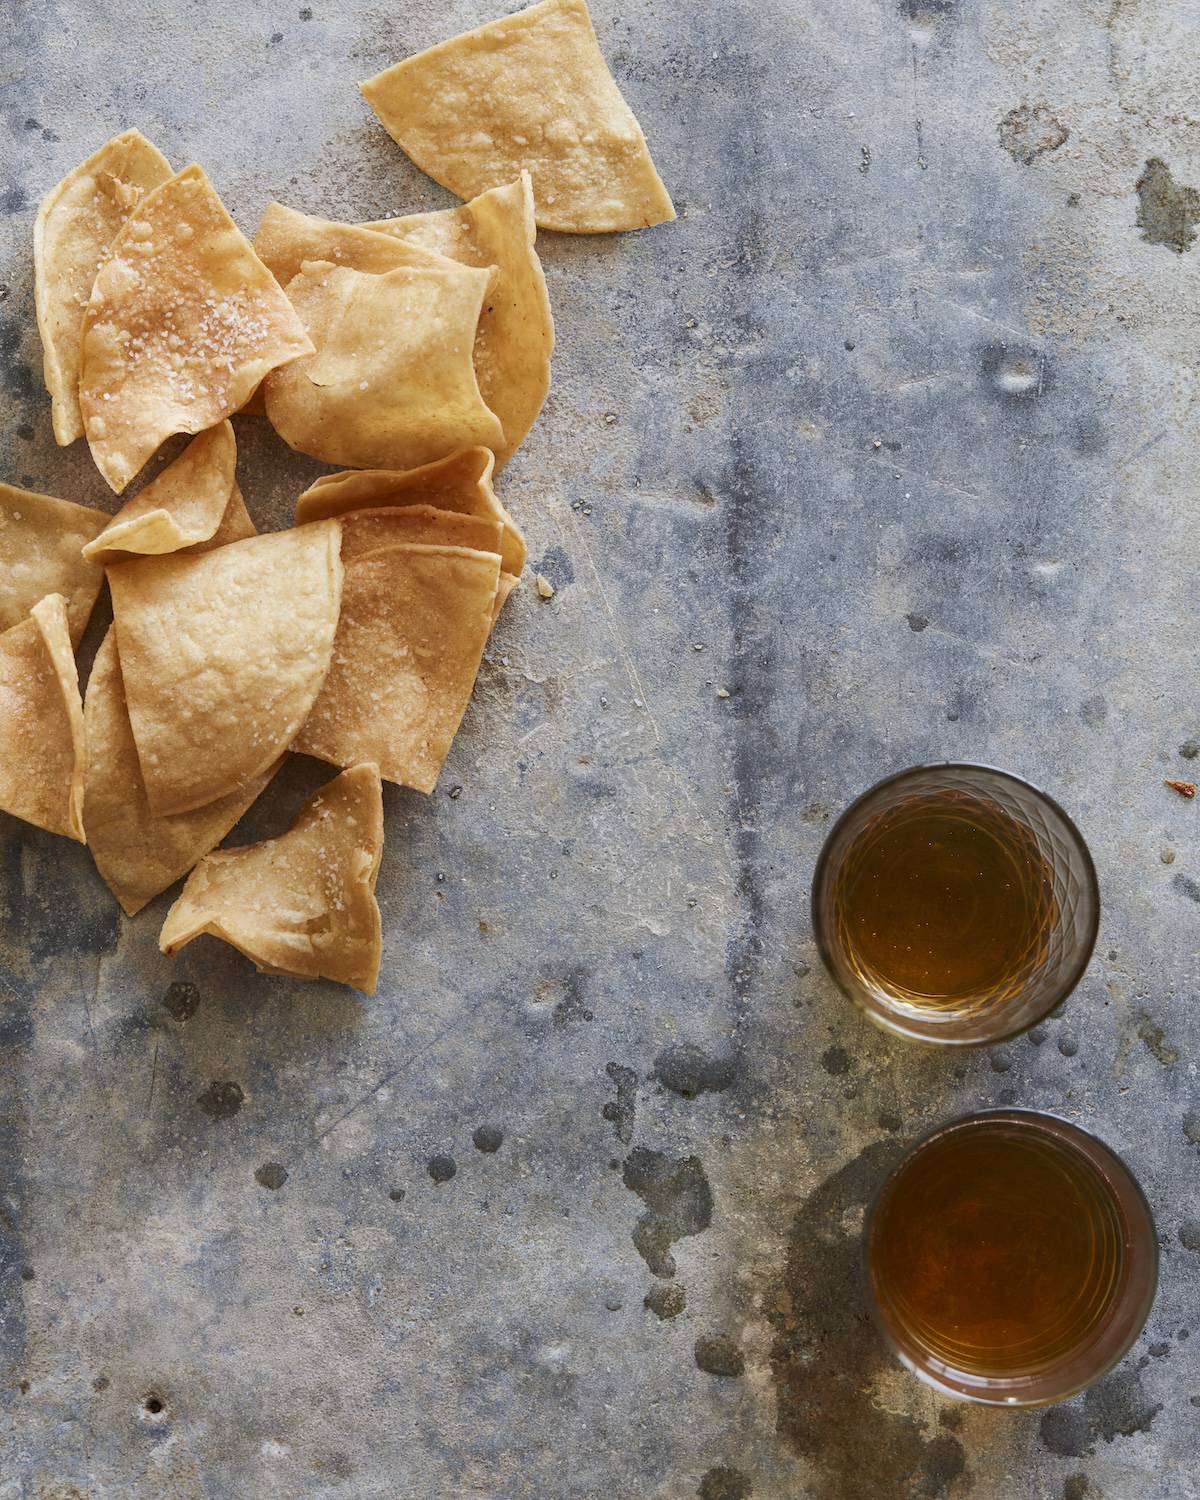 A grey counter with some tortilla chips sprinkled with salt, and two glasses with a liquid in the bottom right.